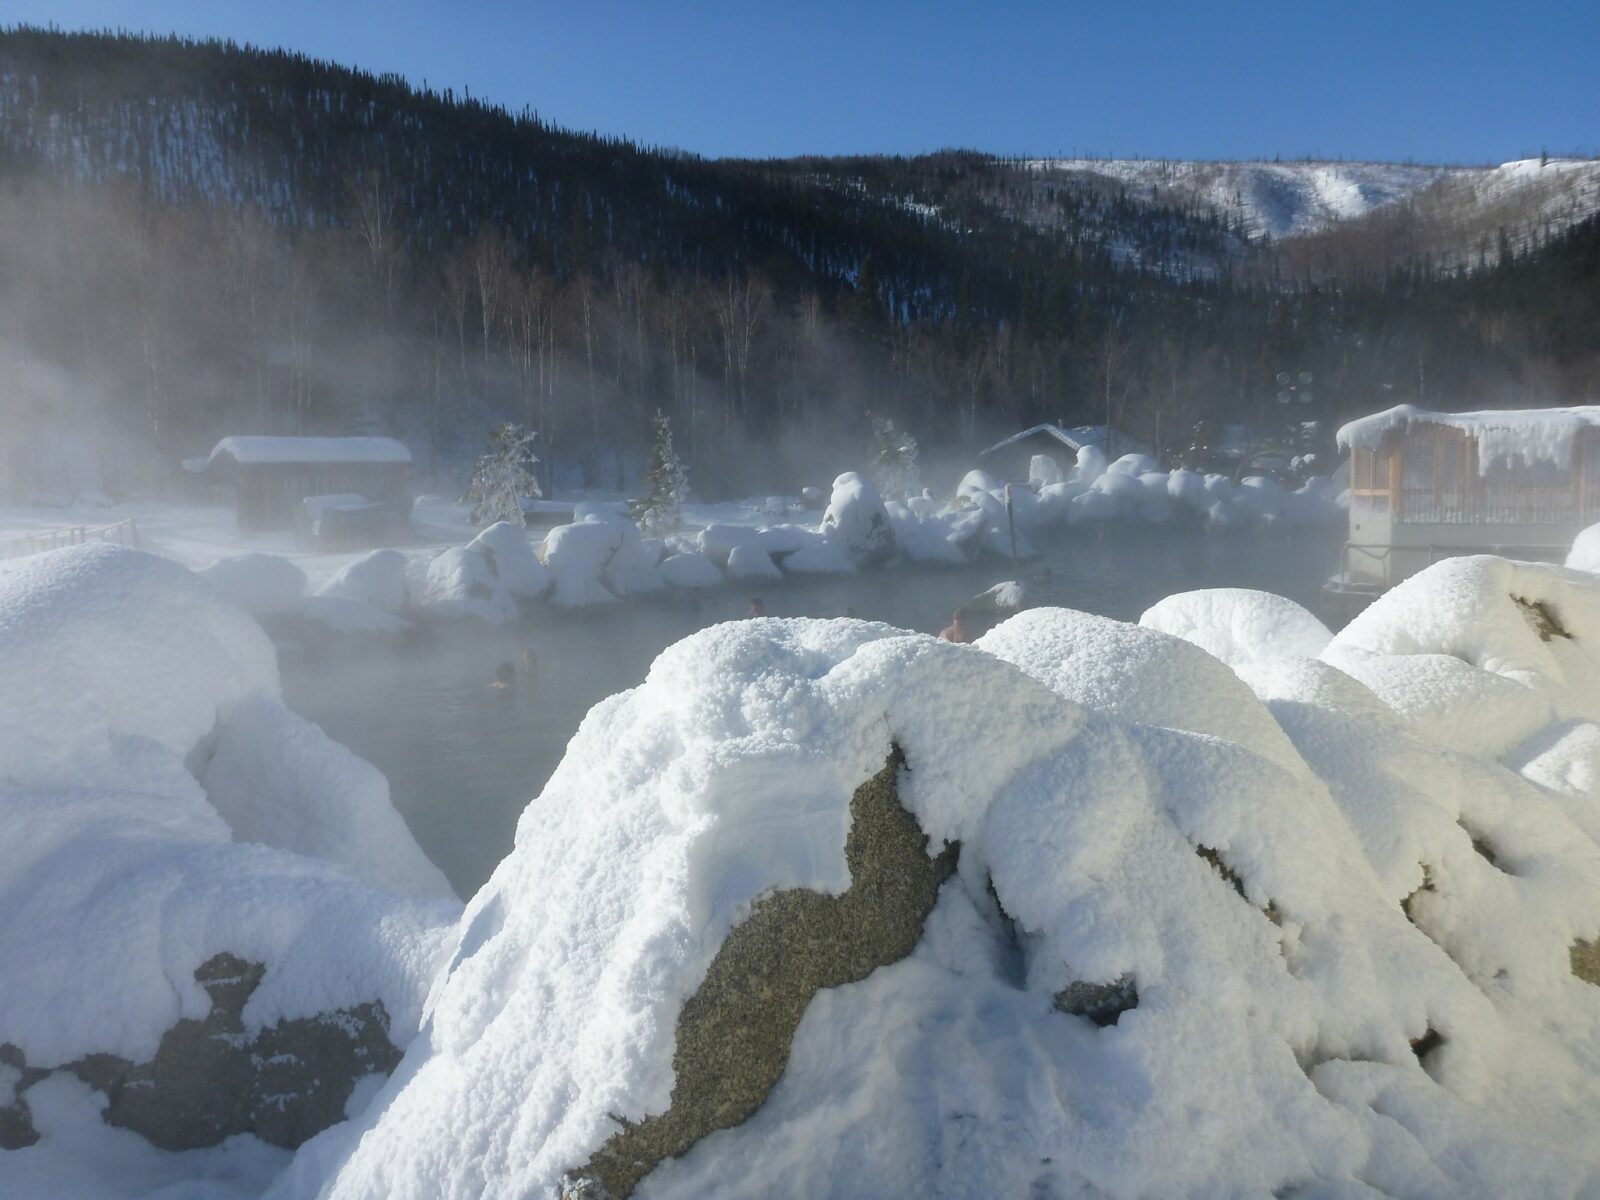 wintry hot springs surrounded by icy and snowy rocks at Chena Hot springs